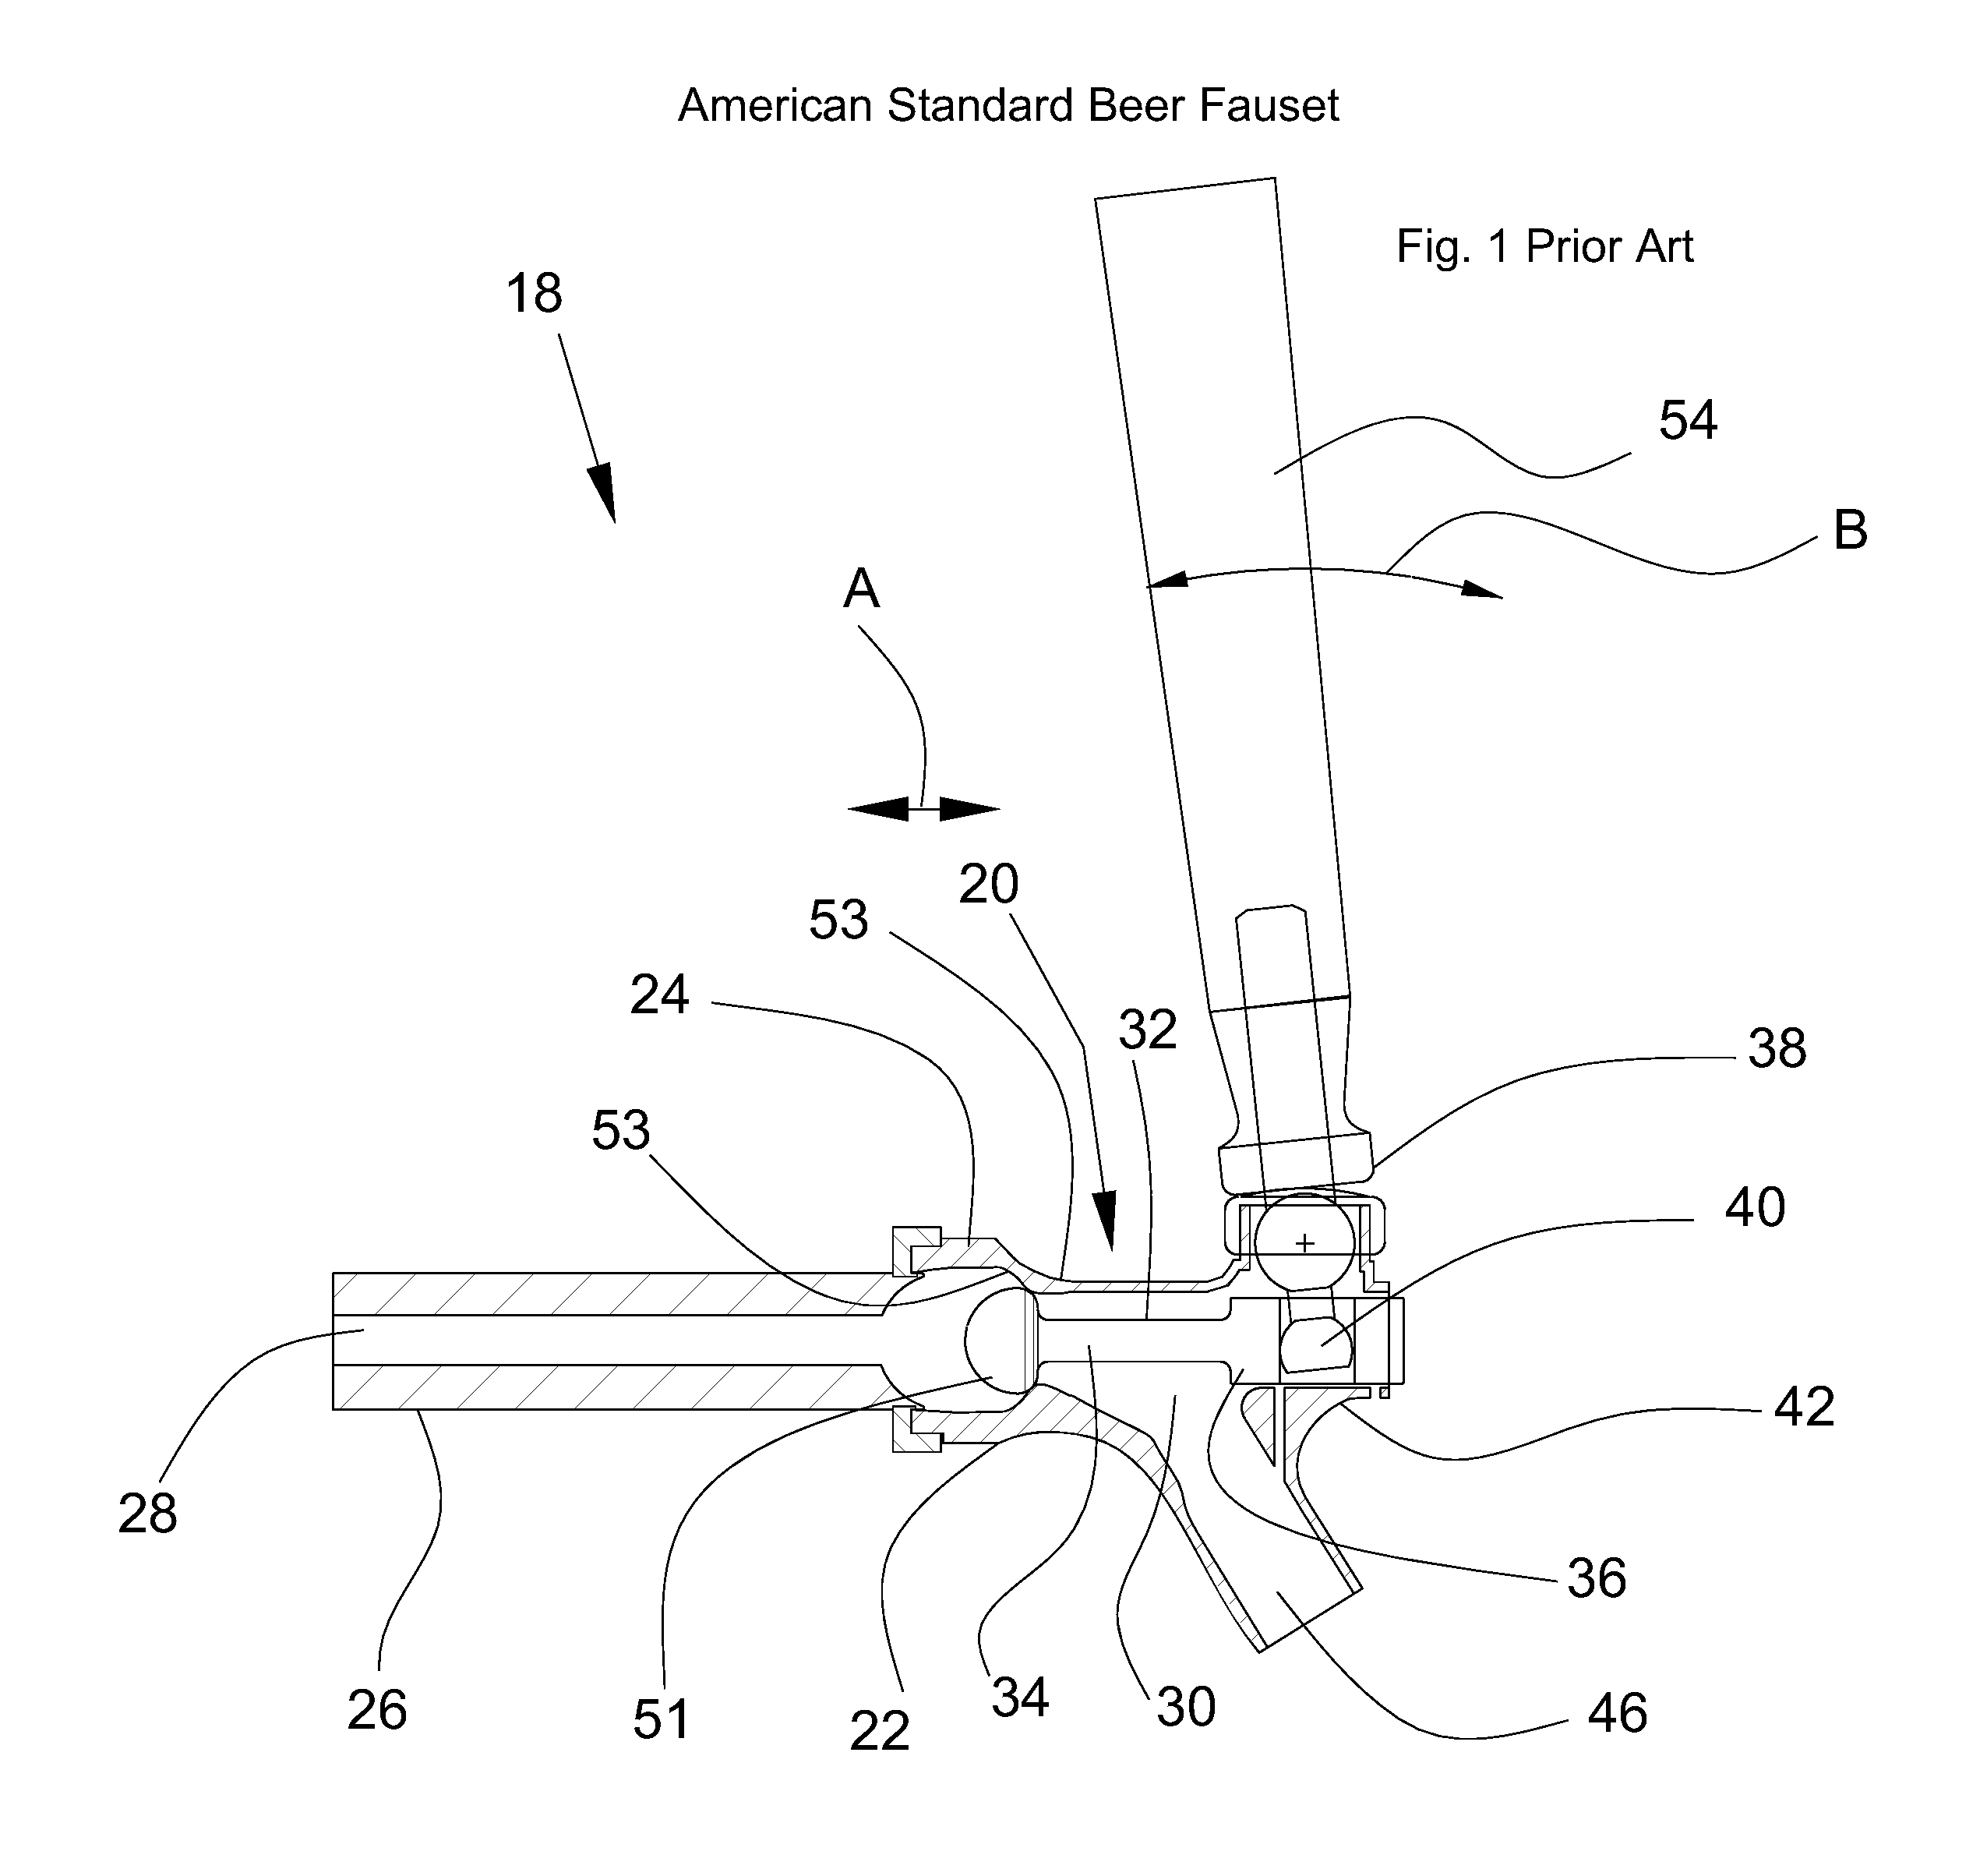 Beverage dispensing system with apparatus for controlling foaming and flow rate